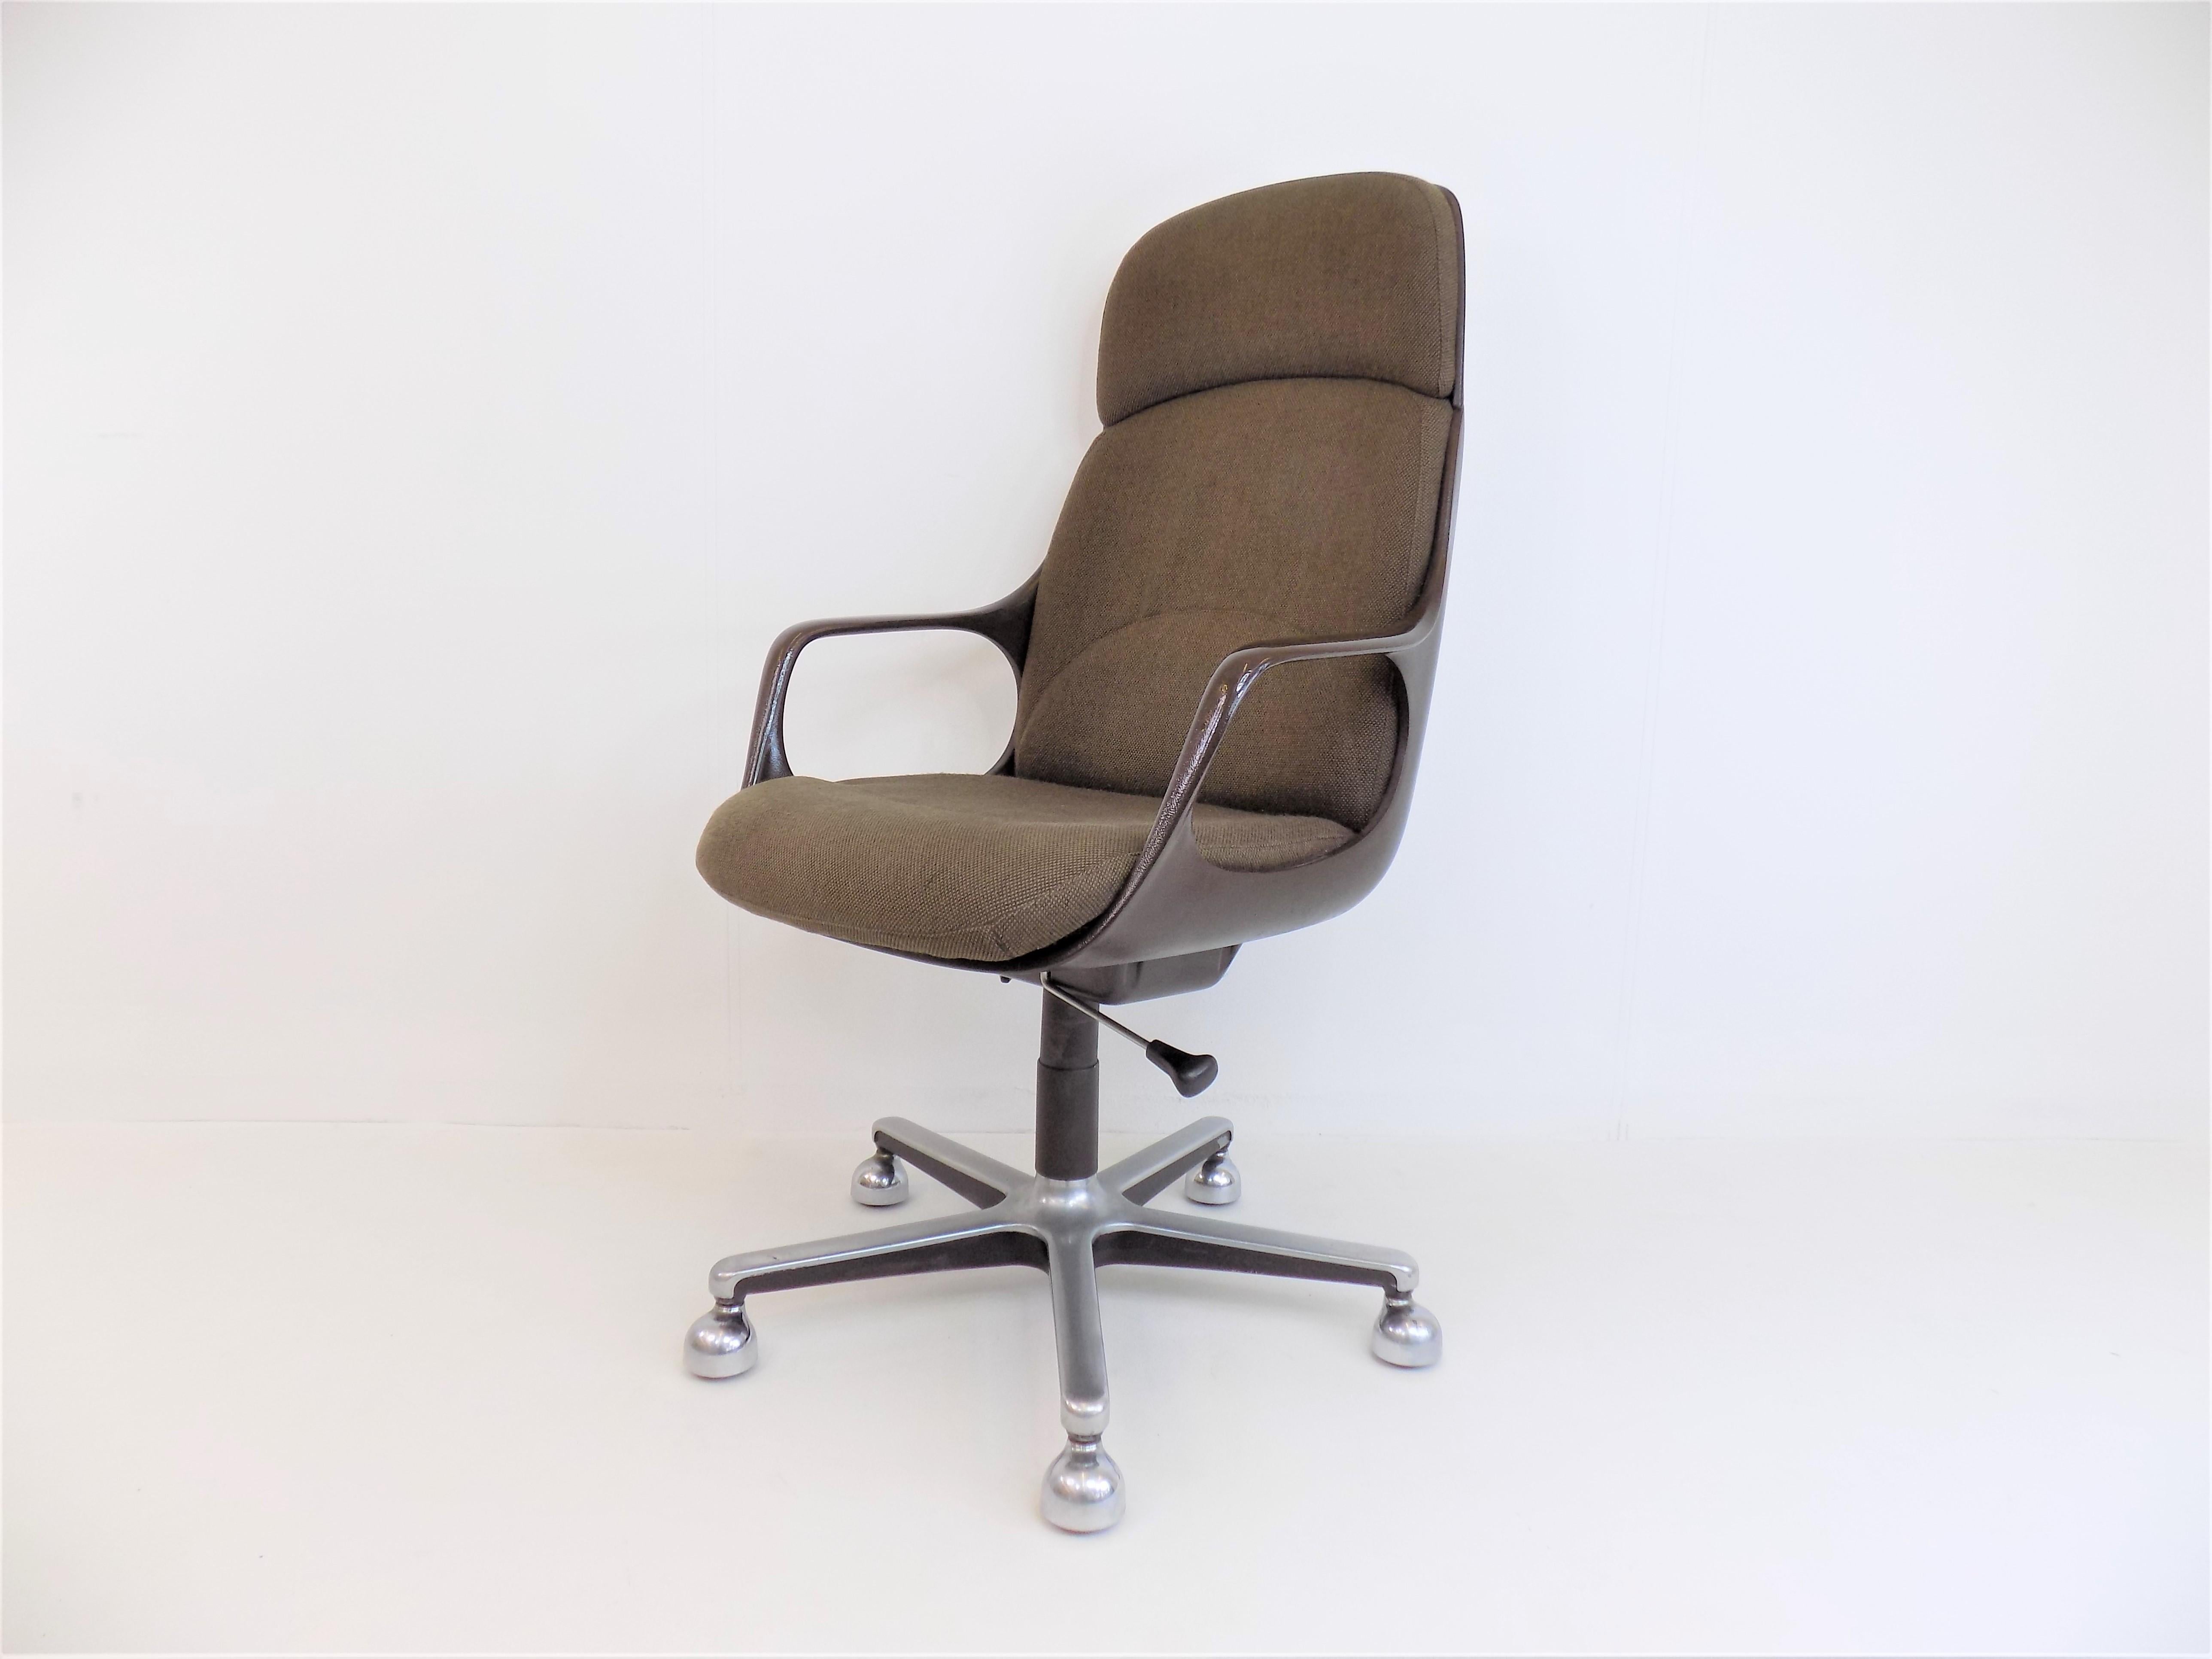 This Drabert office chair from the 1980s, still influenced by the Space Age, is in very good condition. The brown fabric upholstery of the seat and back cushions is immaculate. The backrest and armrests are made of a brown plastic shell and give the